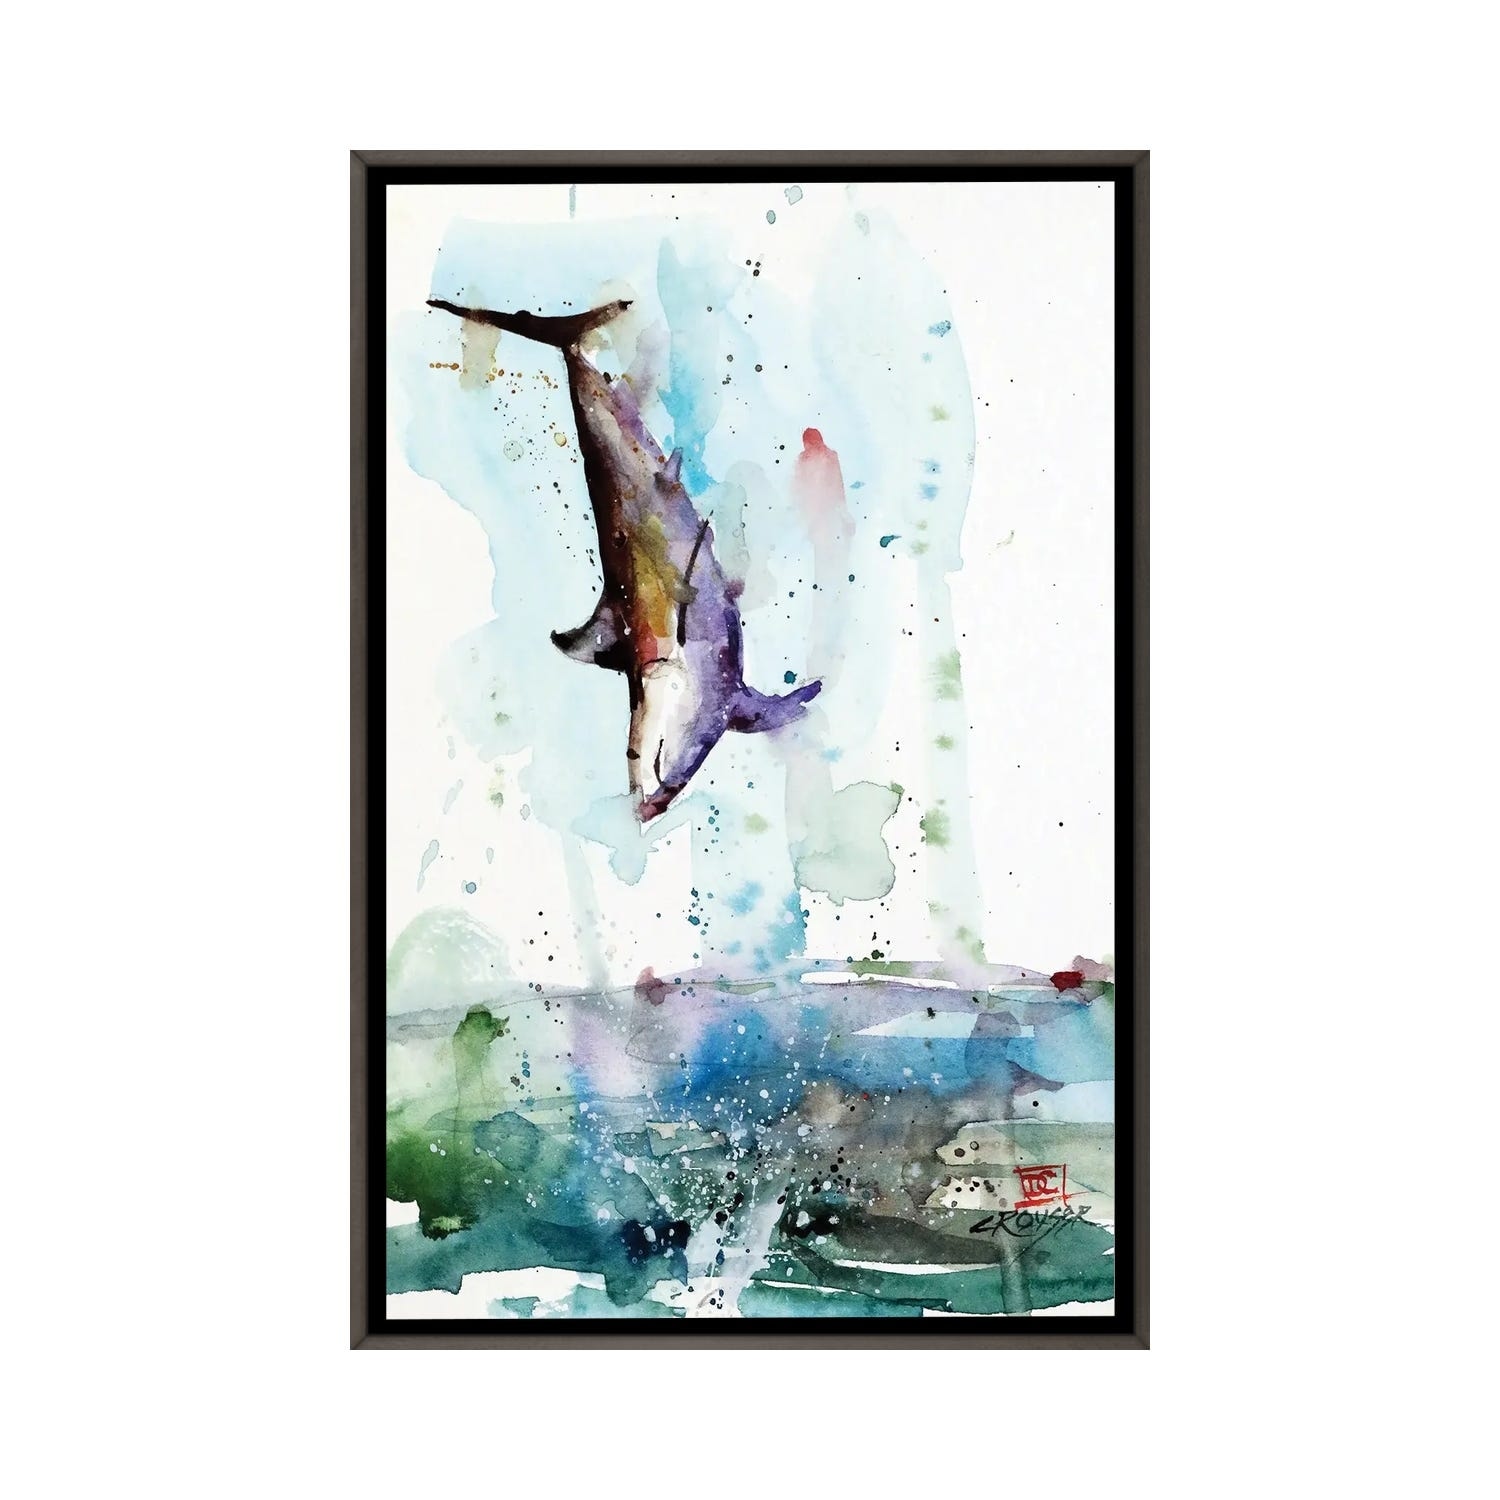 JUMPING RAINBOW Trout Watercolor Fish Print by Dean Crouser 